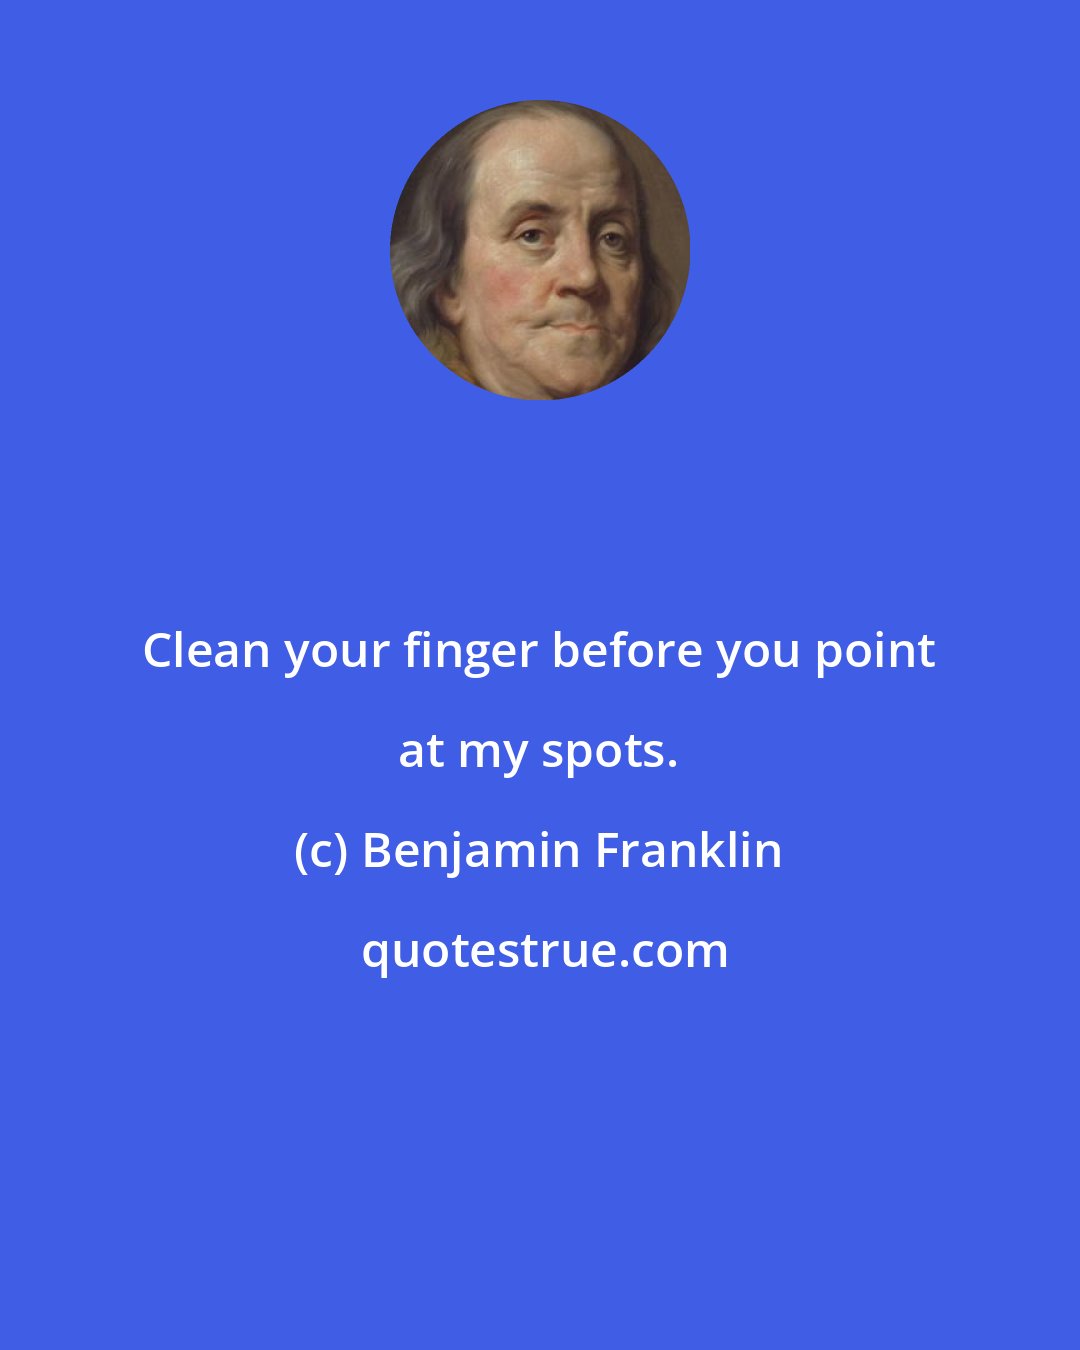 Benjamin Franklin: Clean your finger before you point at my spots.